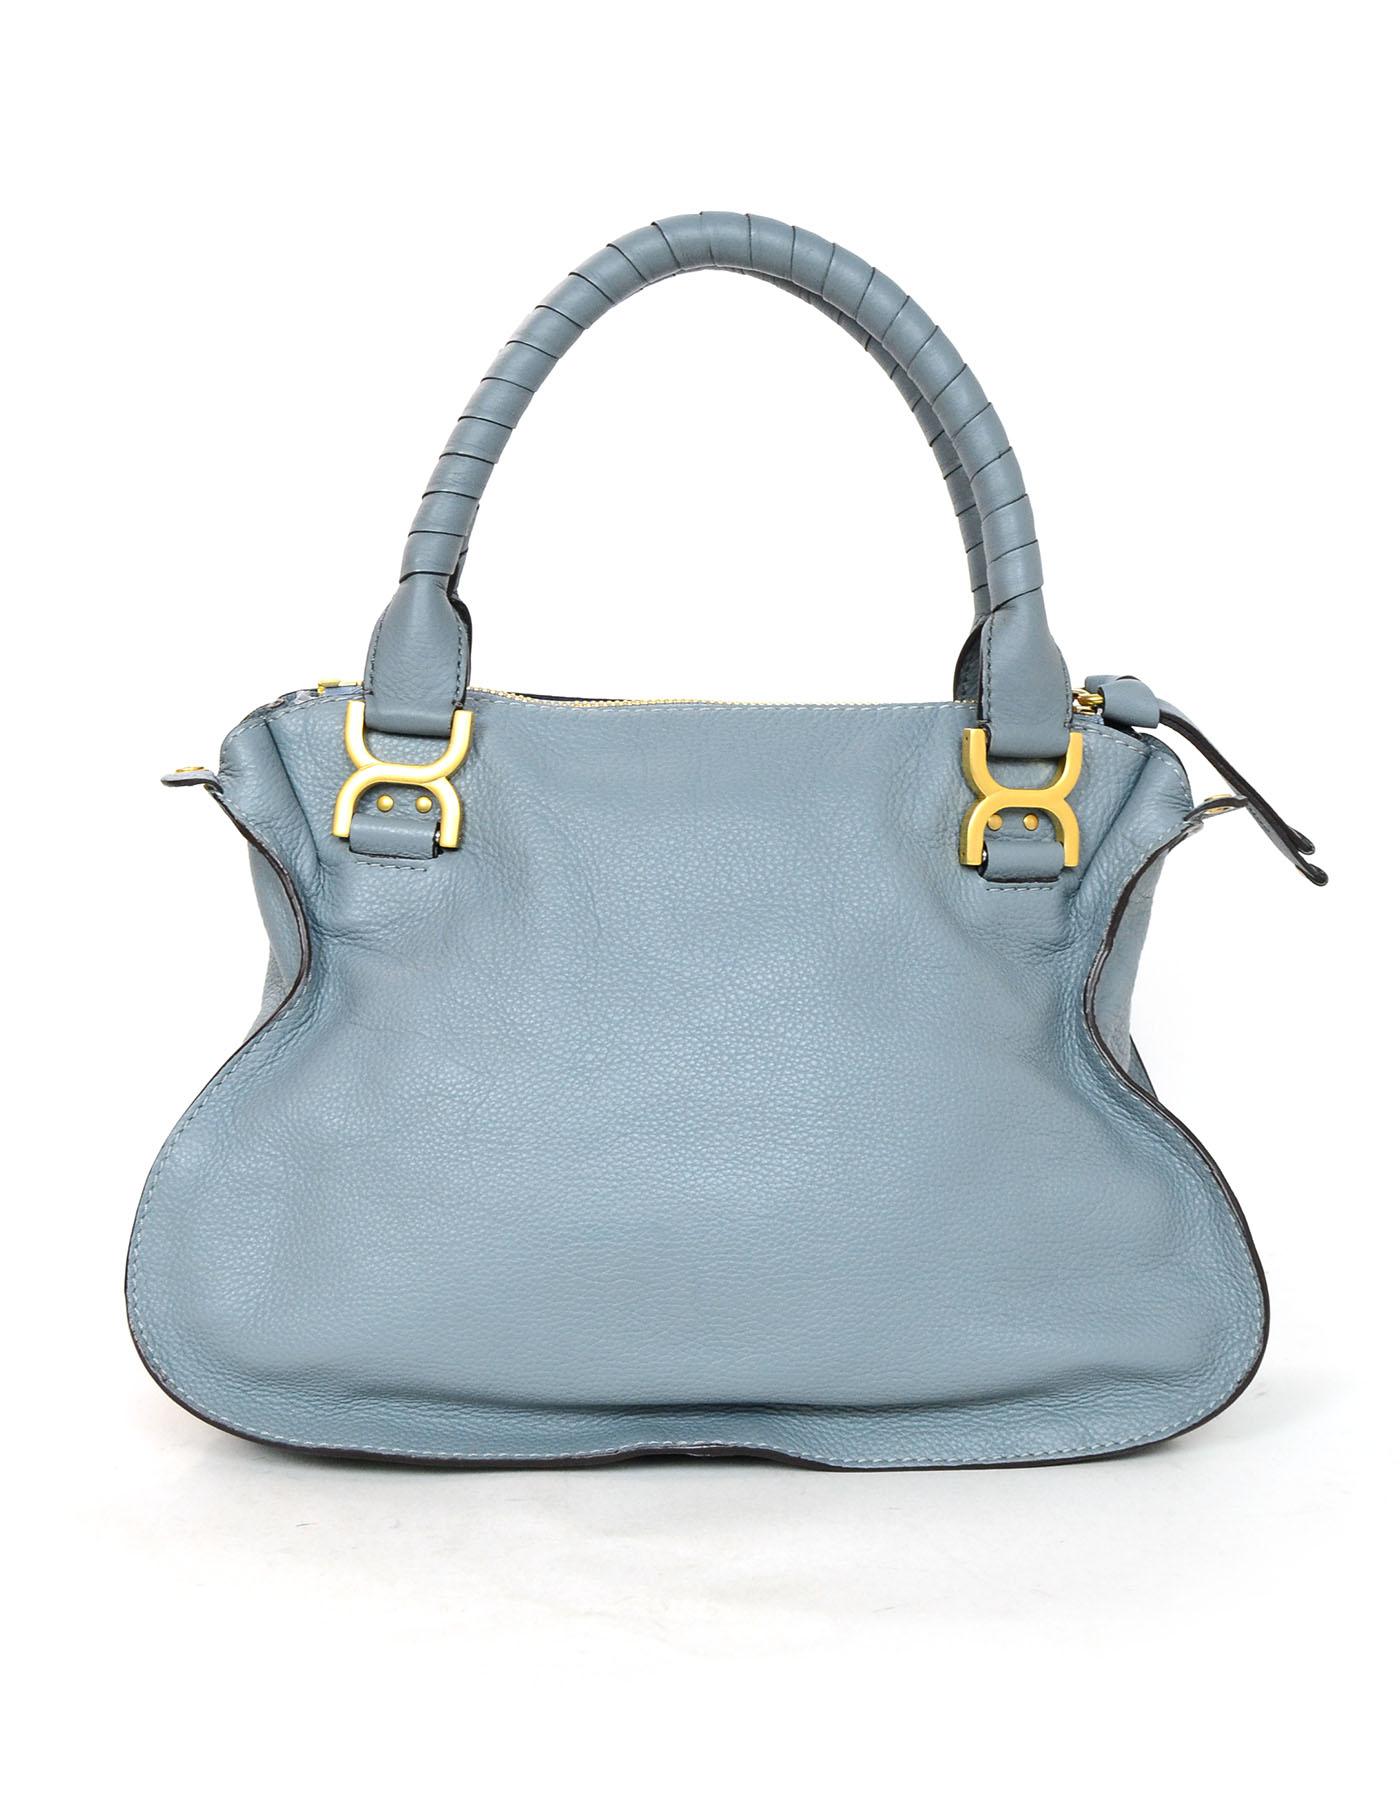 Chloe Cloudy Blue Leather Medium Marcie Satchel Bag

Made In: Italy
Color: Cloudy blue
Hardware: Goldtone
Materials: Leather, gold
Lining: Brown textile
Closure/Opening: Zip top
Exterior Pockets: Under front flap
Interior Pockets: Zip wall pocket,